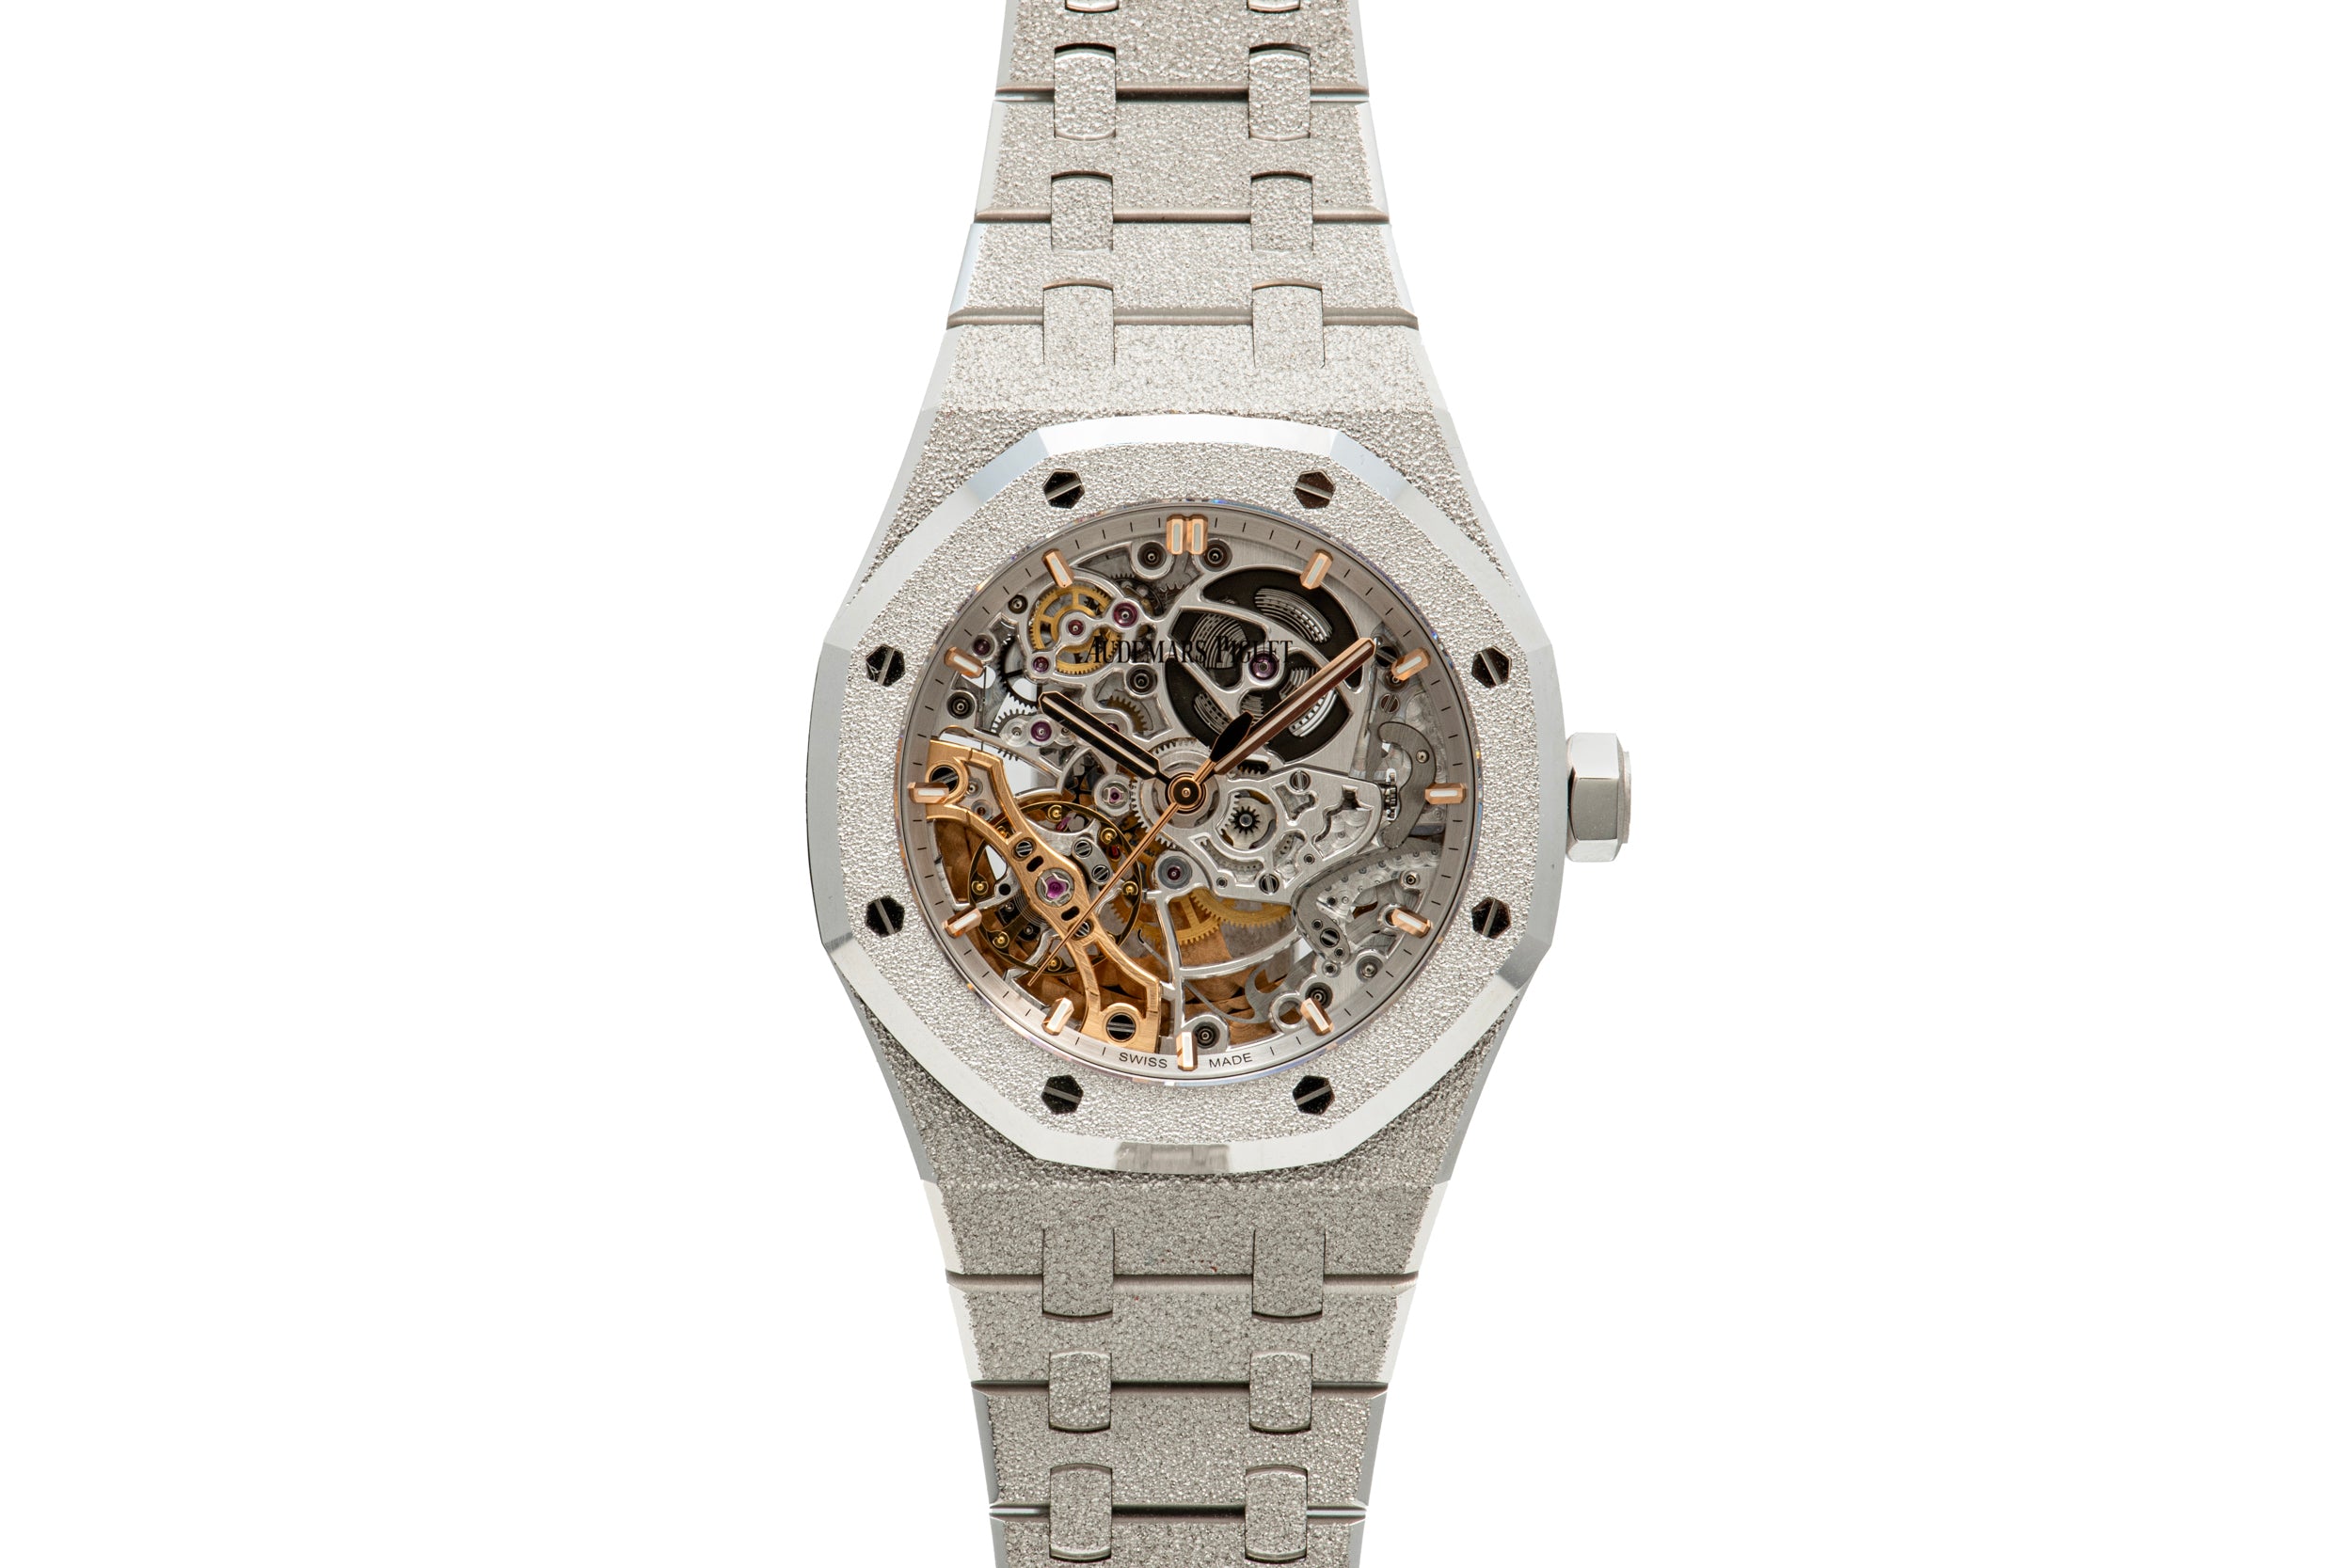 Audemars Piguet Royal Oak Double Balance Wheel Openworked 41mm... for  $300,000 for sale from a Trusted Seller on Chrono24